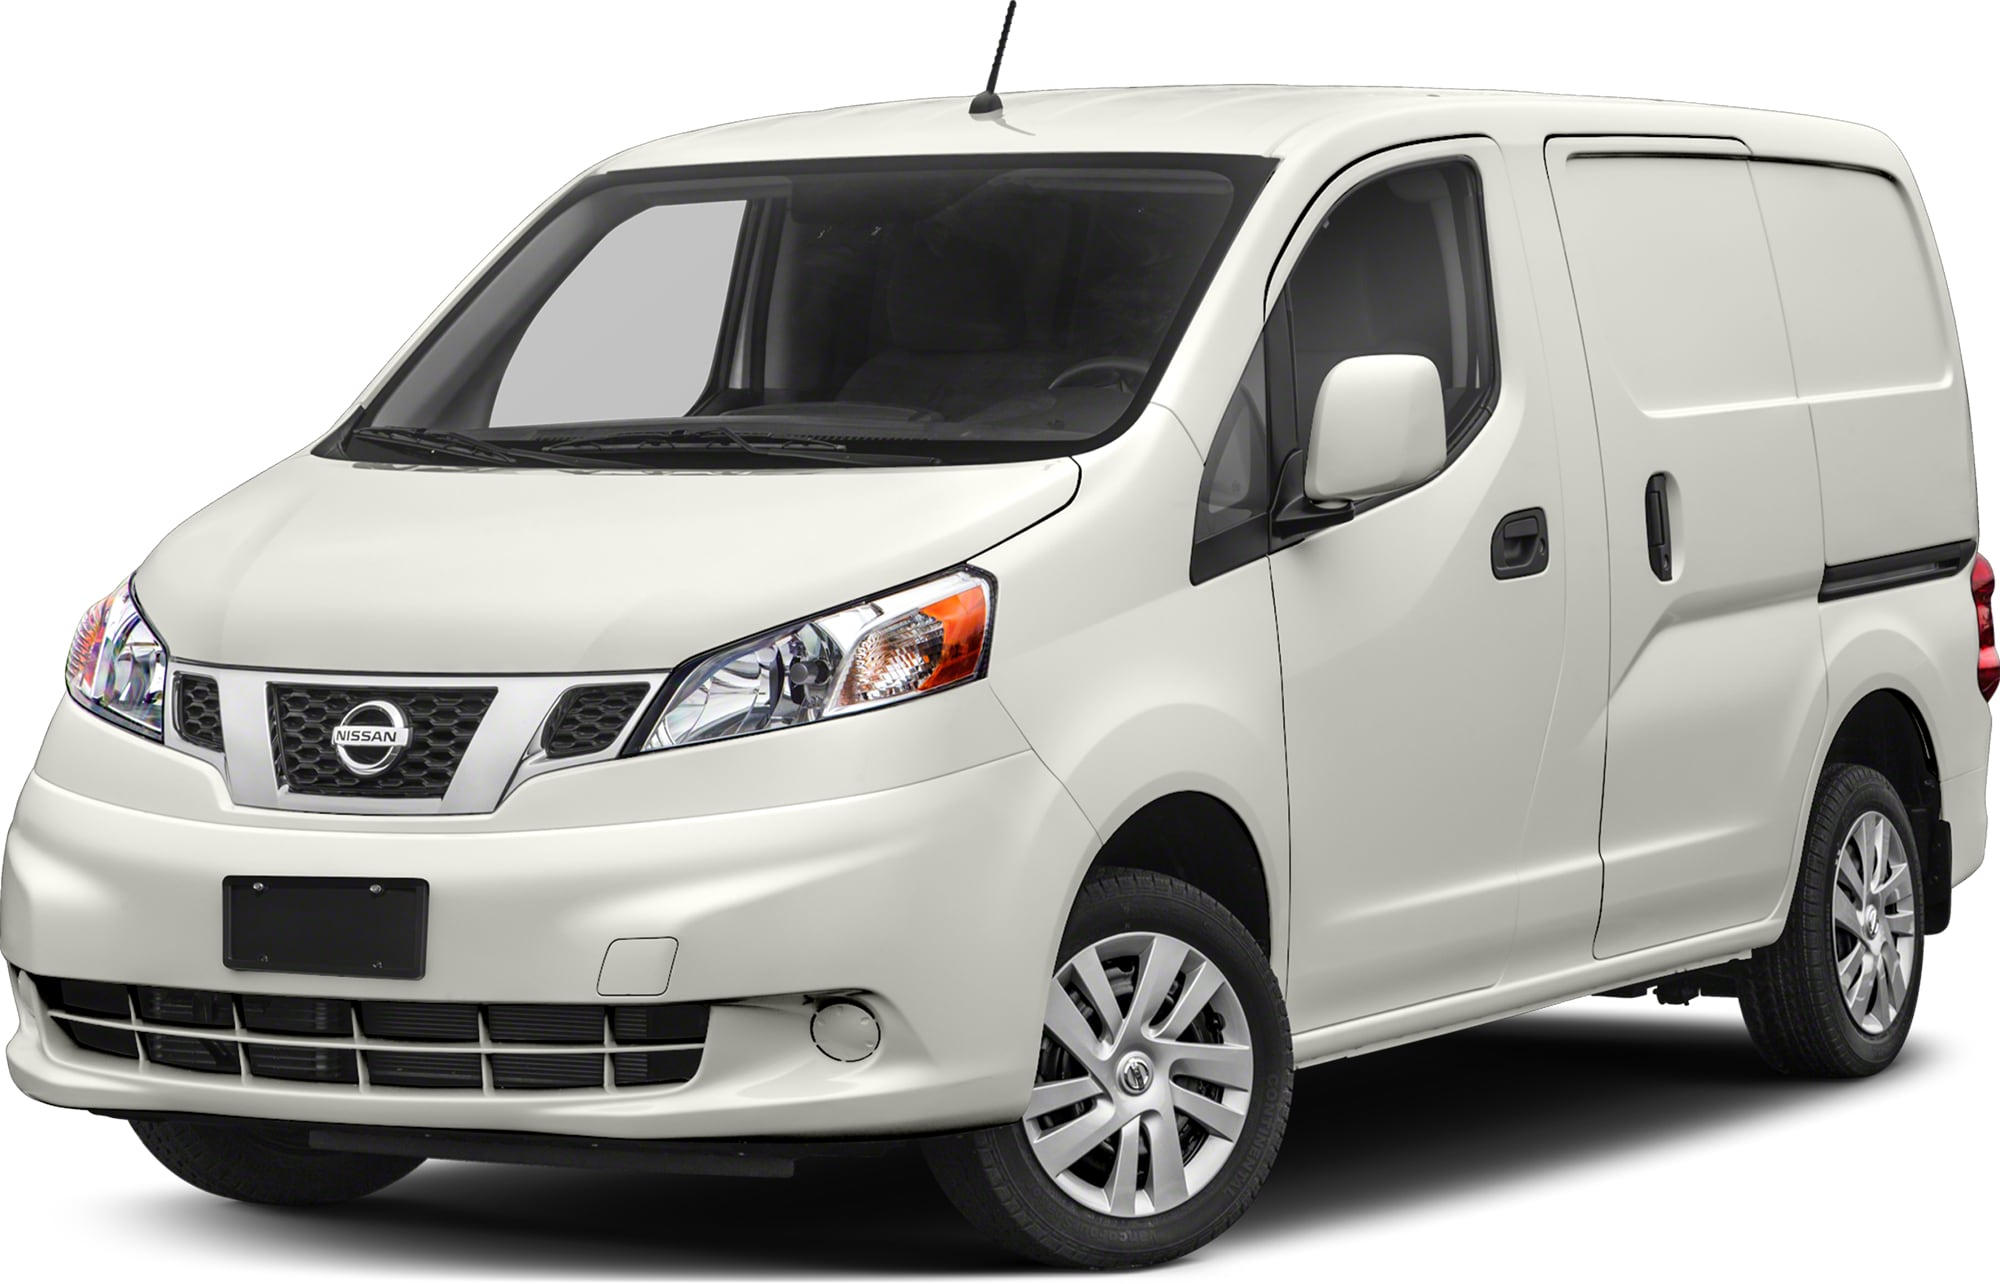 New Nissan  NV200 Vans For Sale in Aurora CO Tynan s 